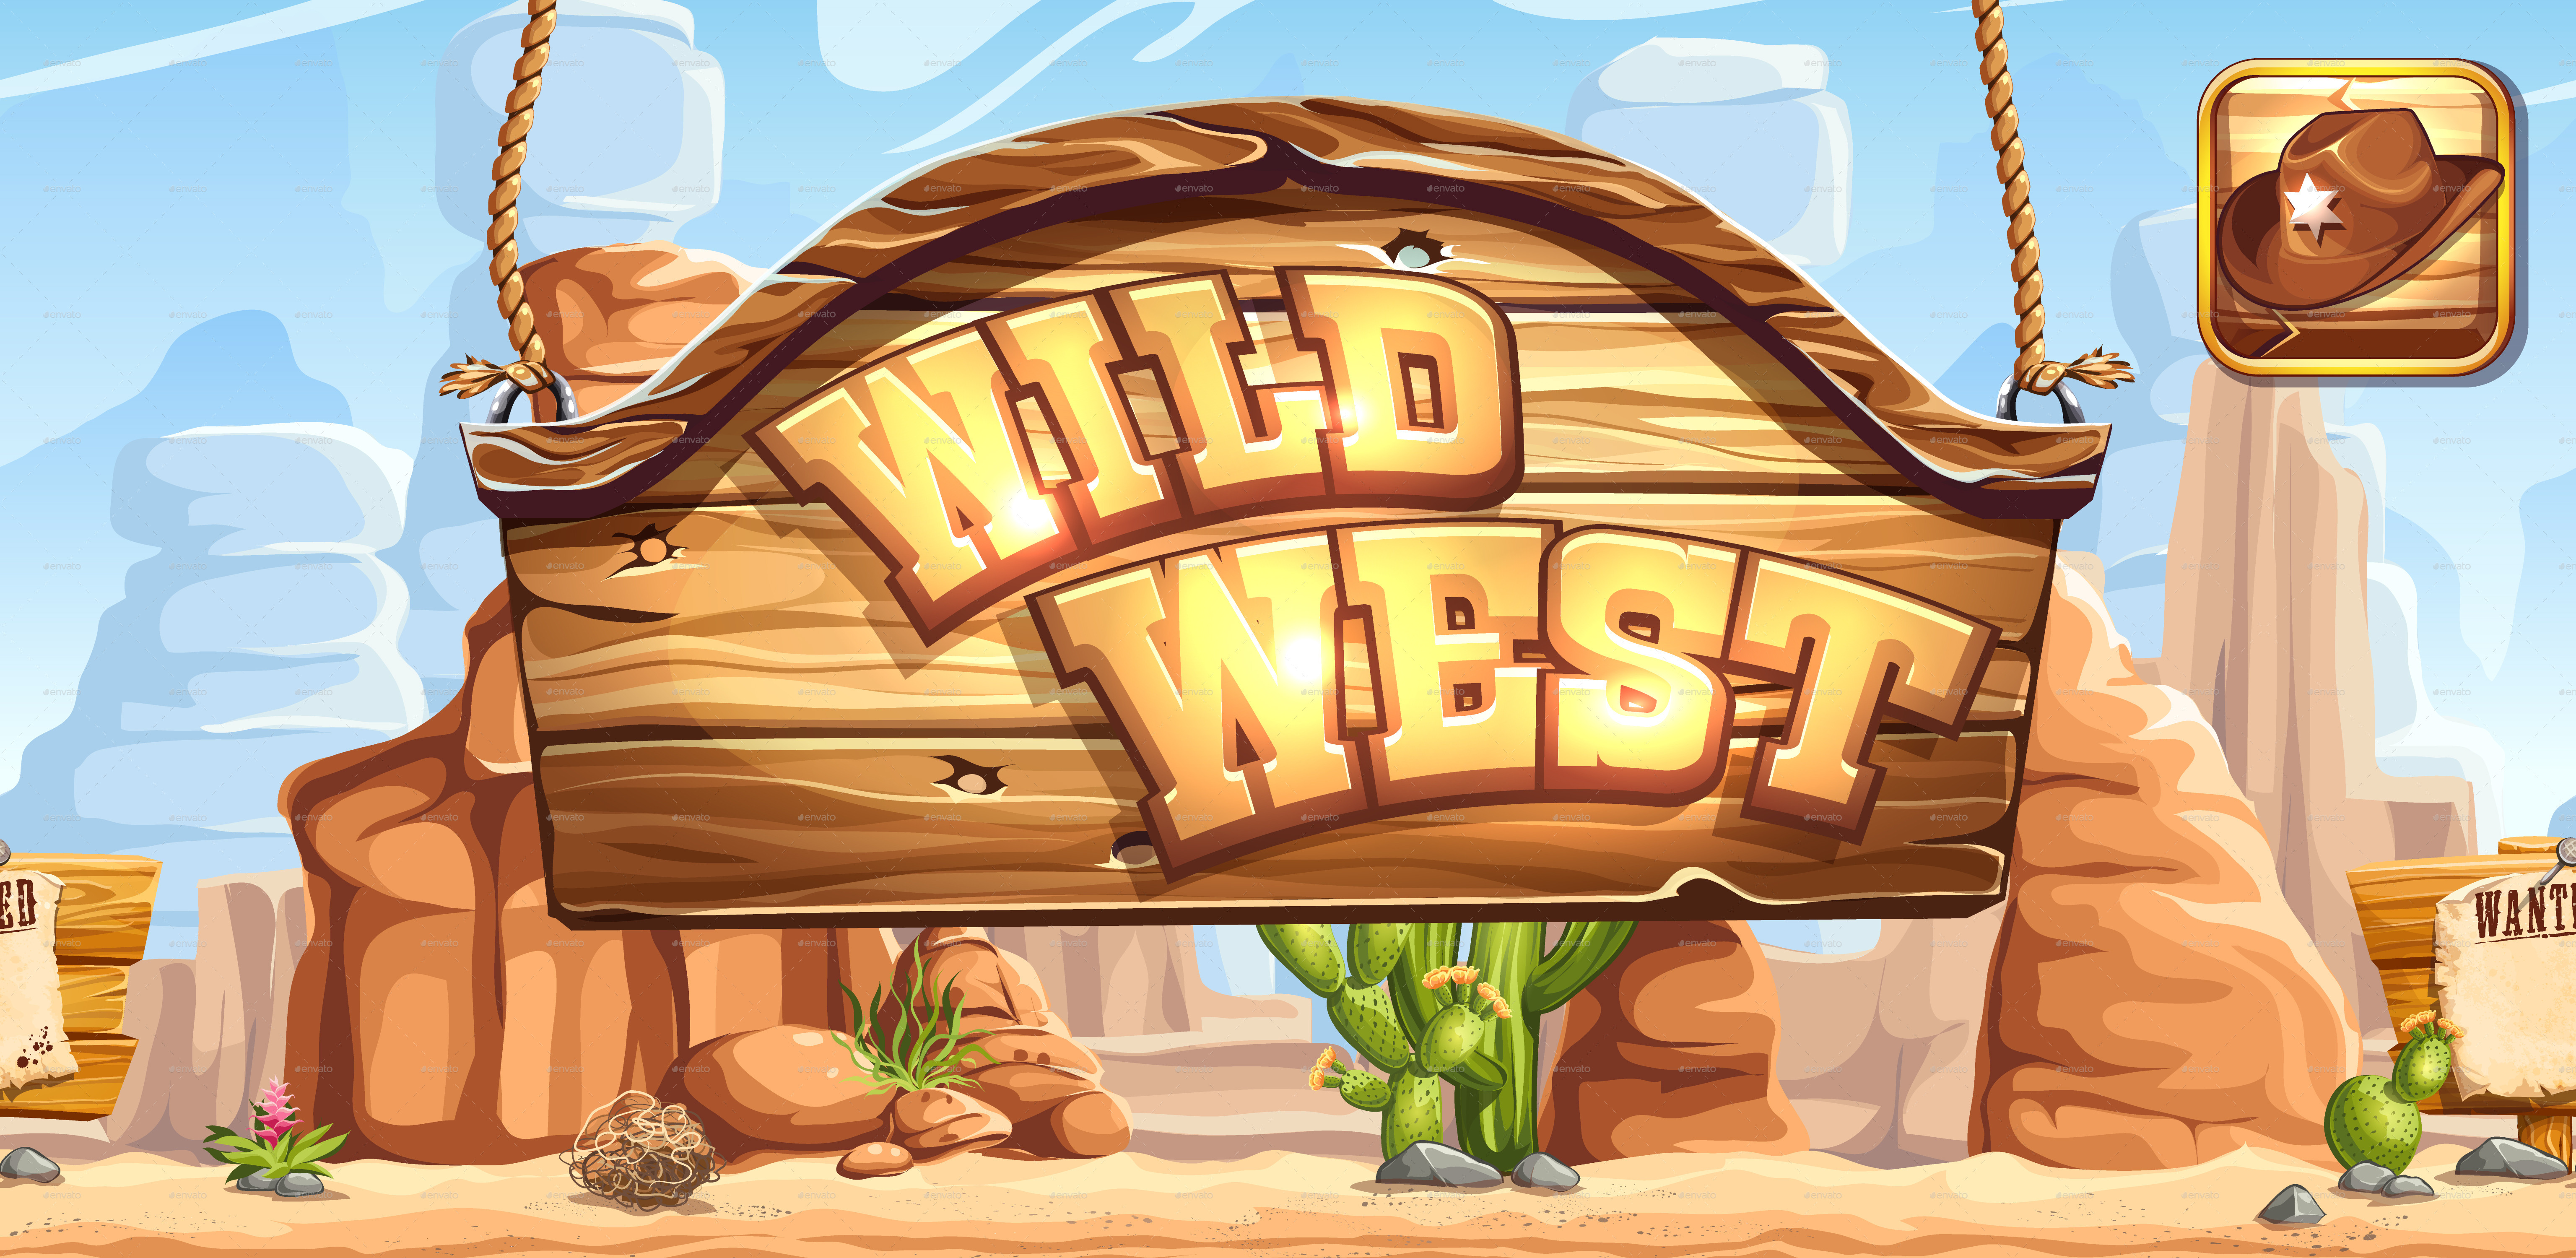 what is an elder label in the game wild west frontiere